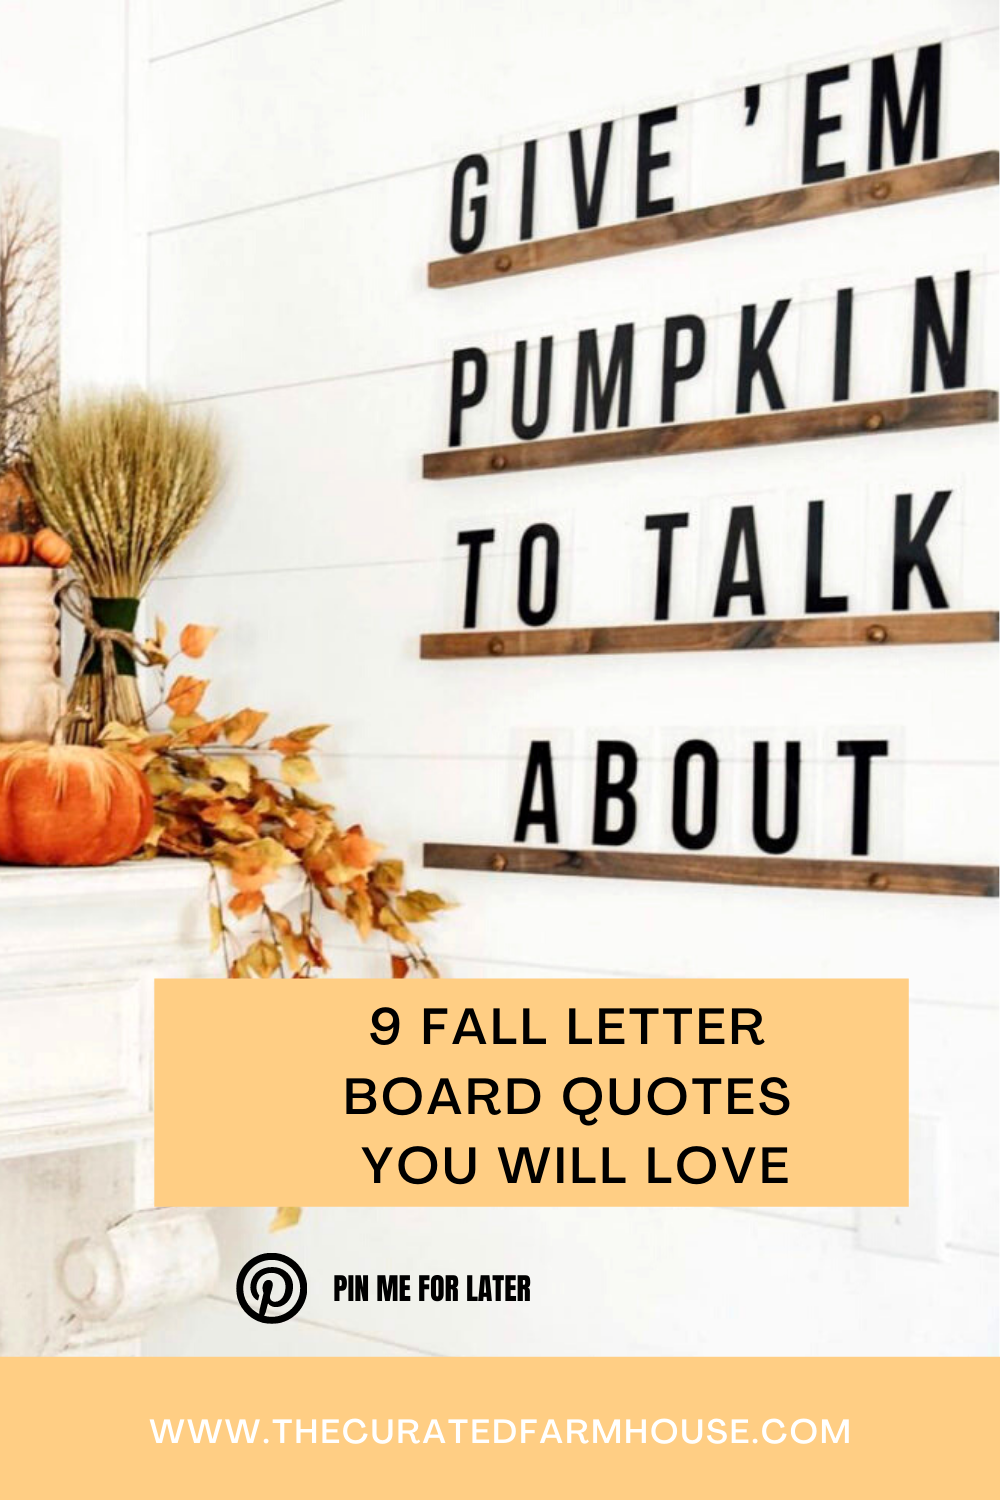 9 Fall Letter Board Quotes You Will Love